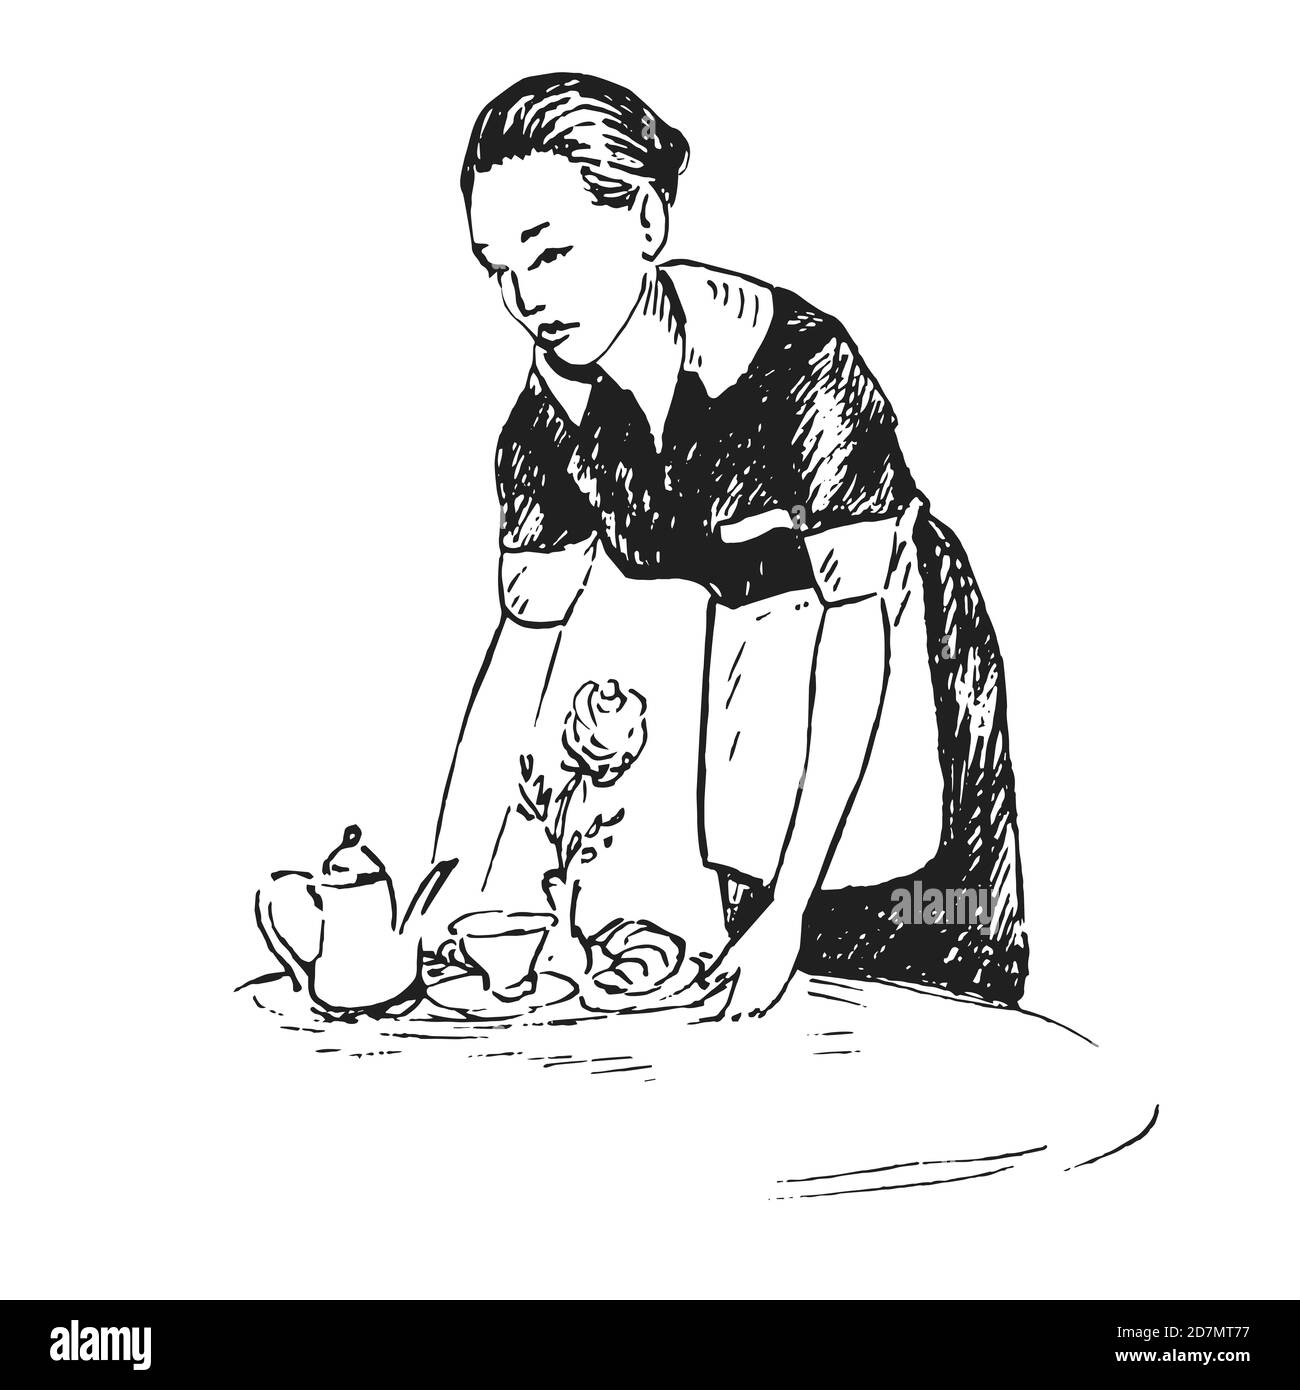 Waitress putting tray on the table with breakfast, hand drawn doodle, sketch, black and white illustration Stock Photo